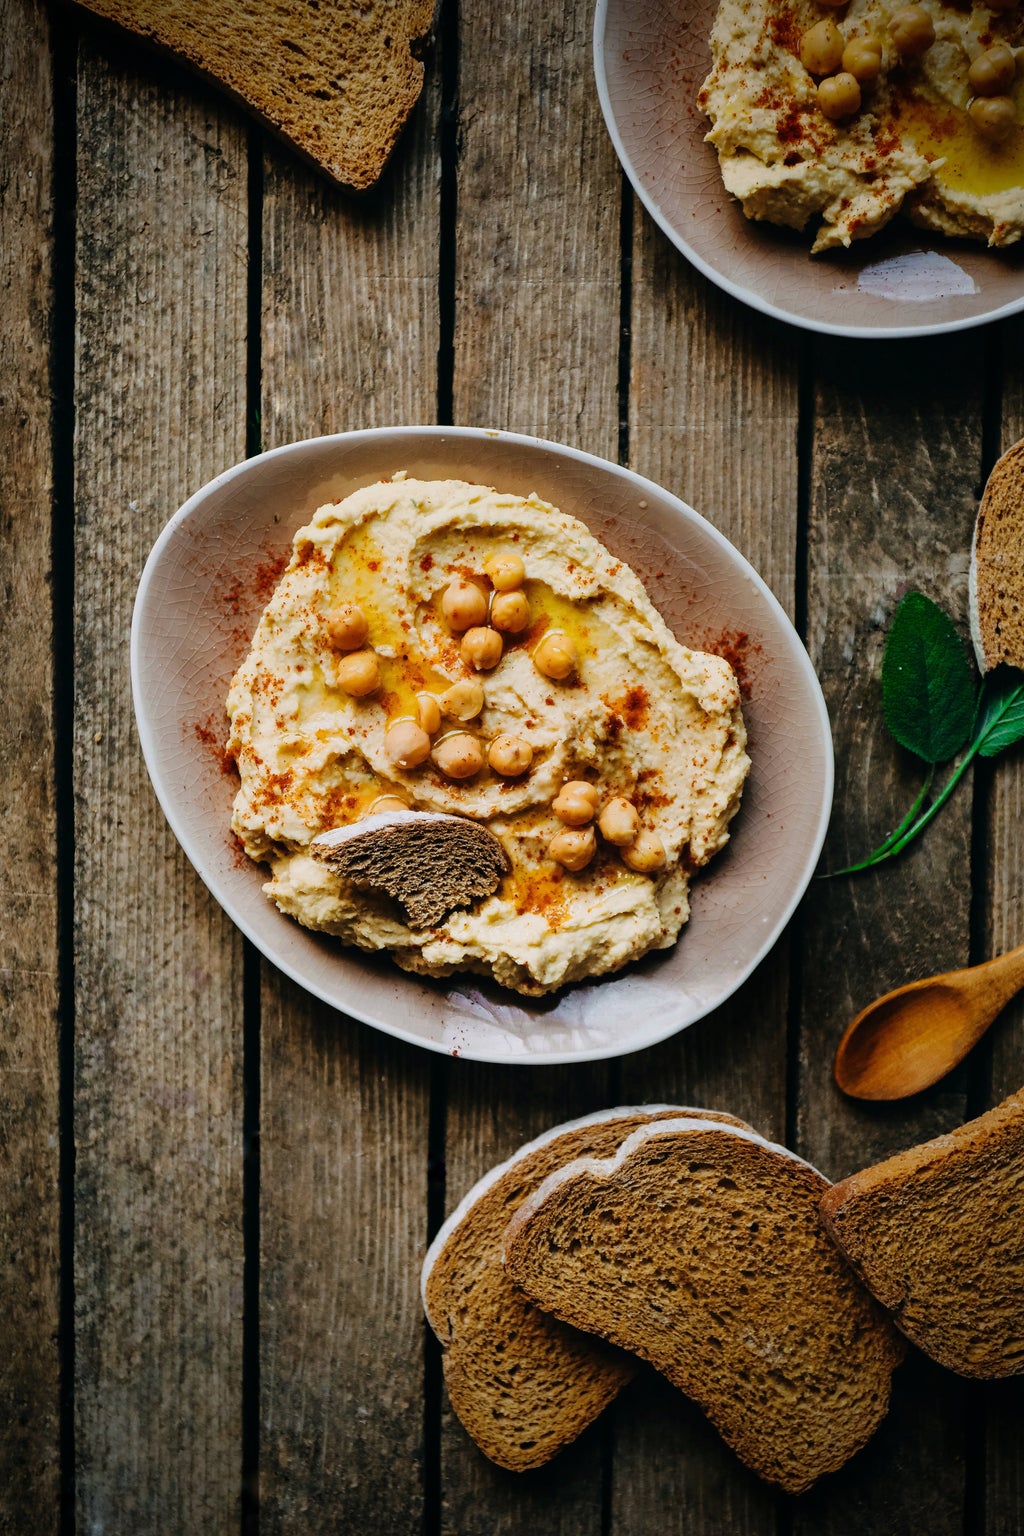 hummus with chickpeas and bread on the side